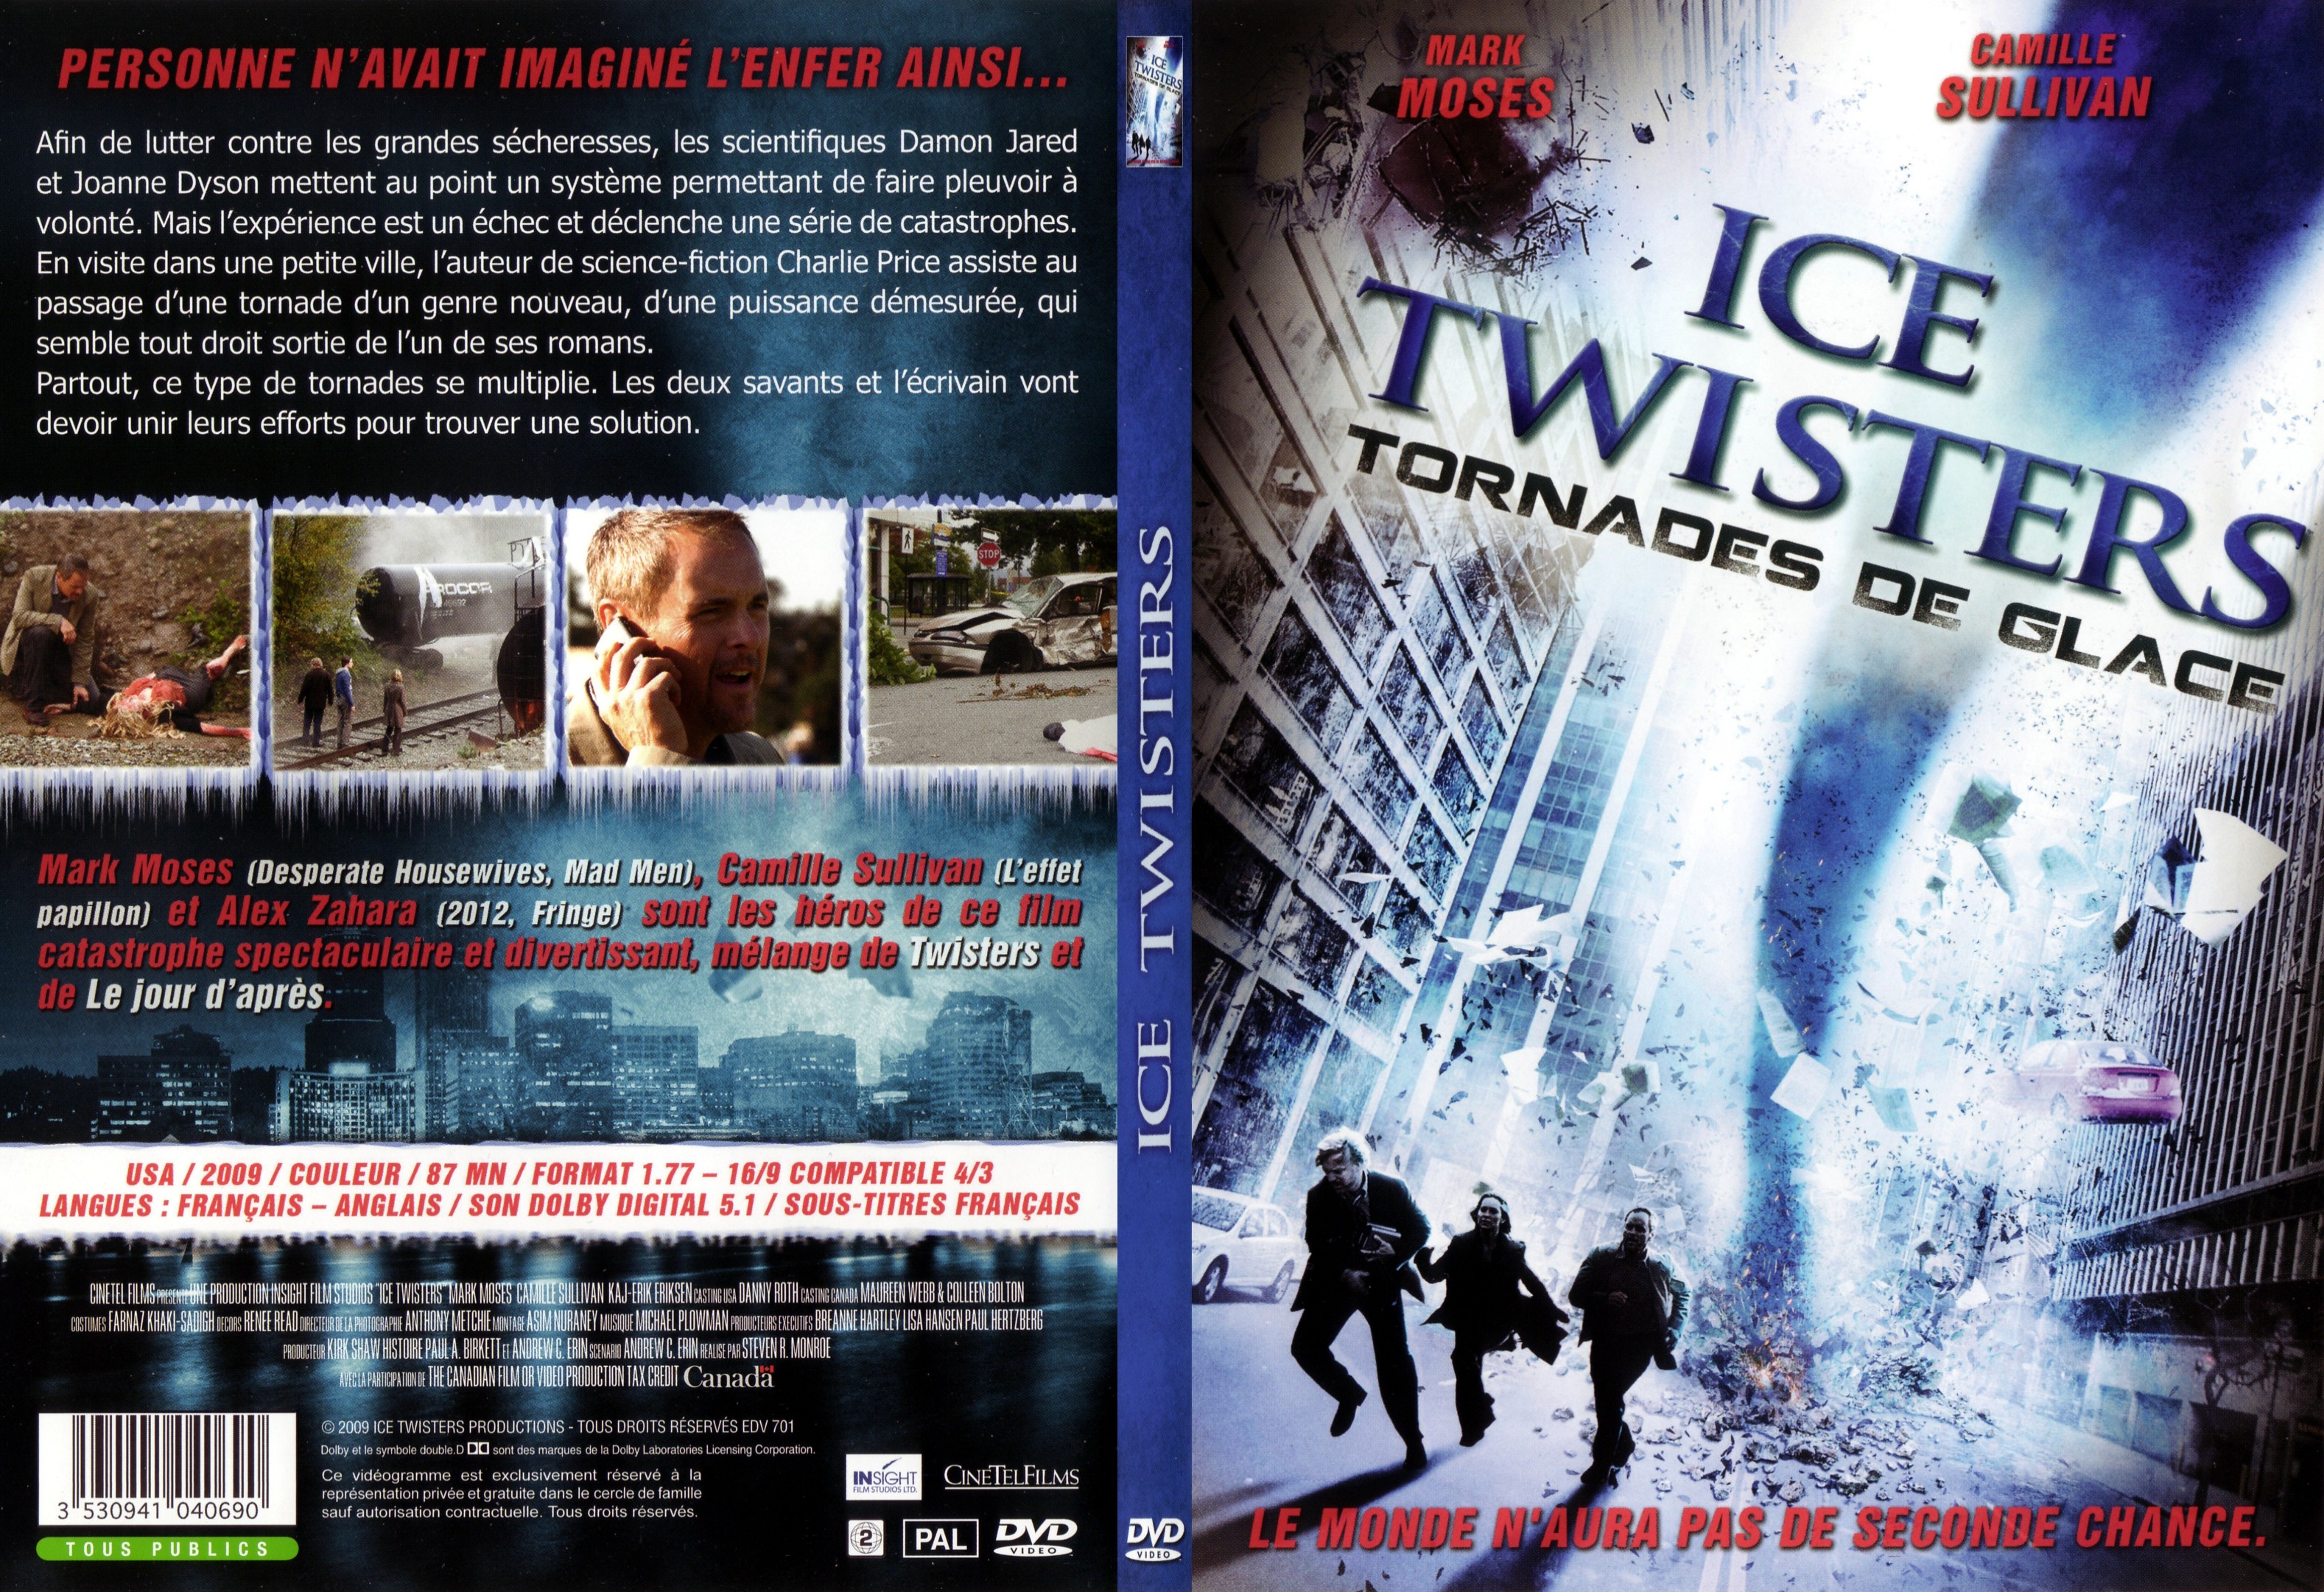 Jaquette DVD Ice twisters - SLIM